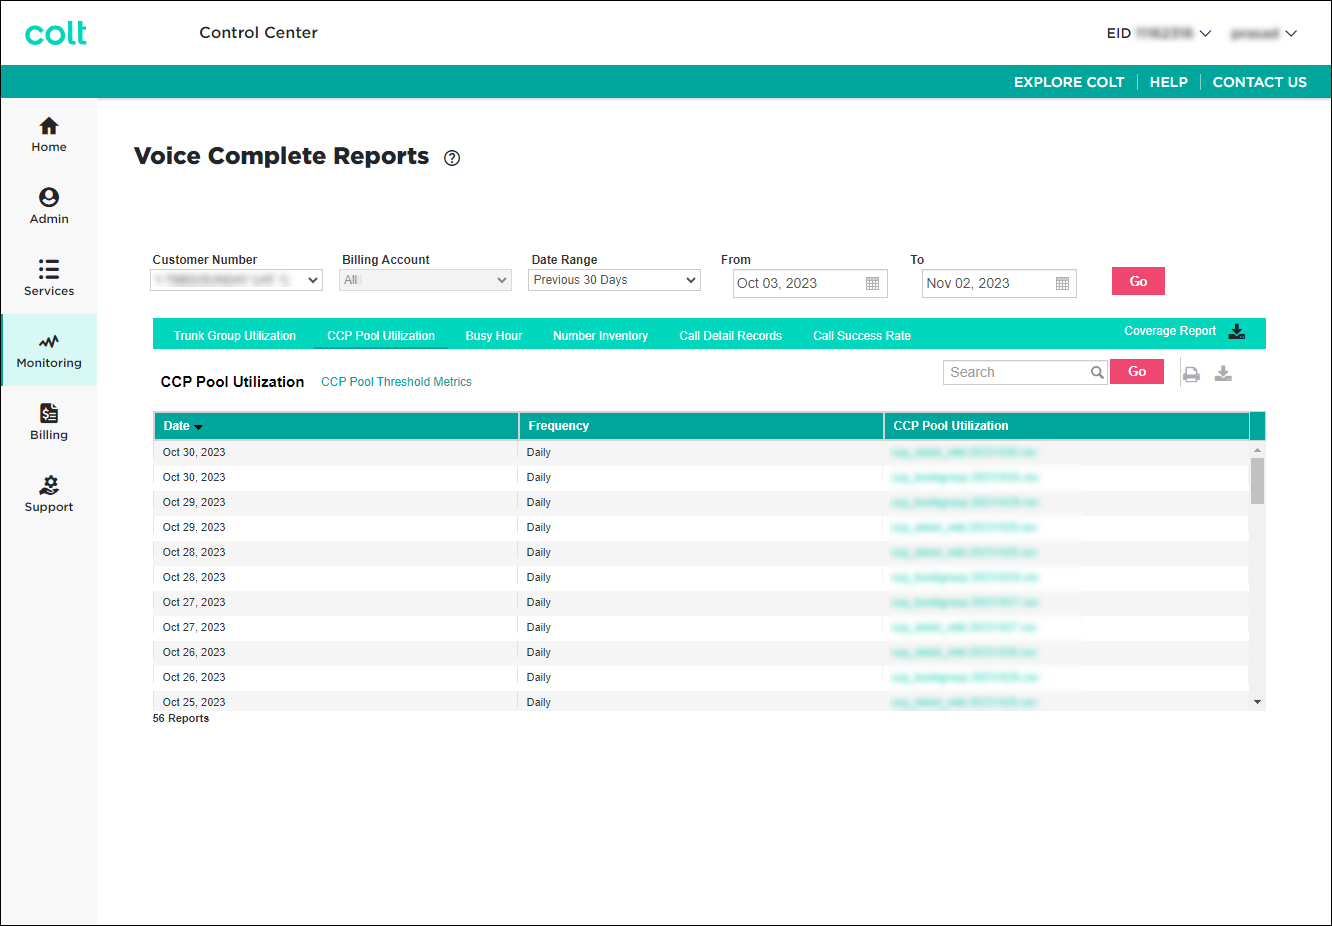 Voice Complete Reports (showing CCP Pool Utilization)